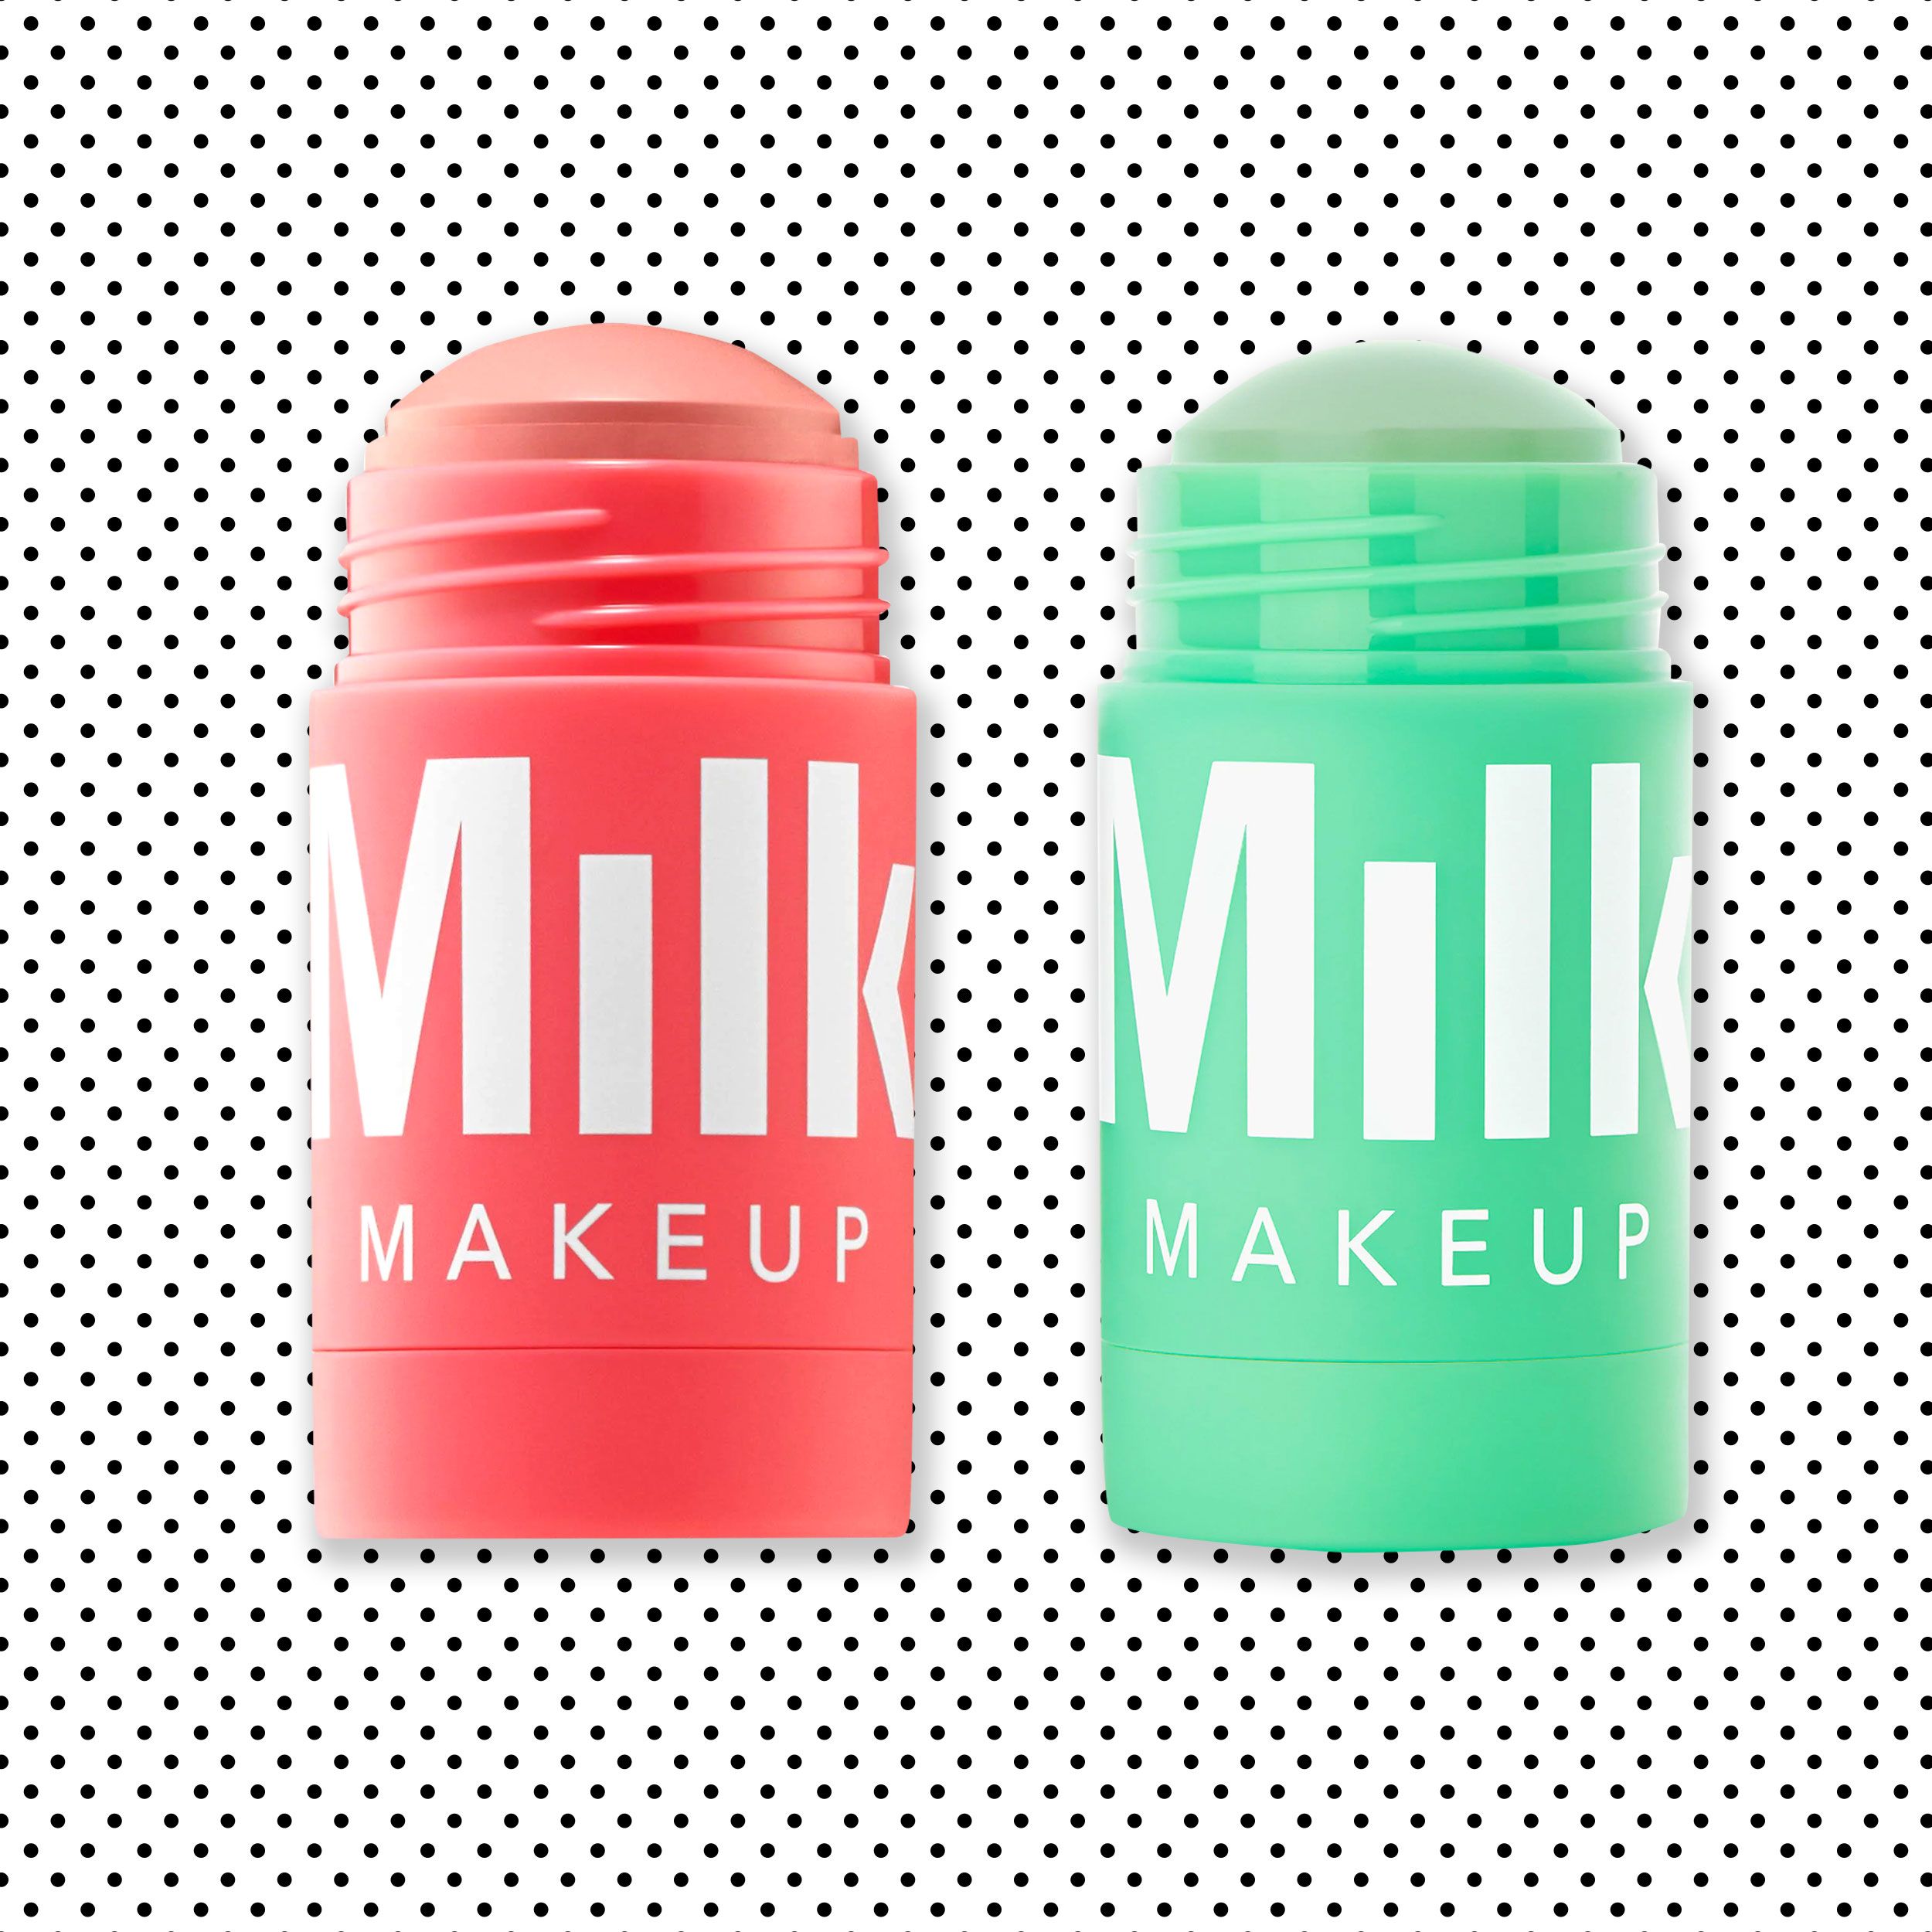 Milk Makeup Watermelon and Face Review